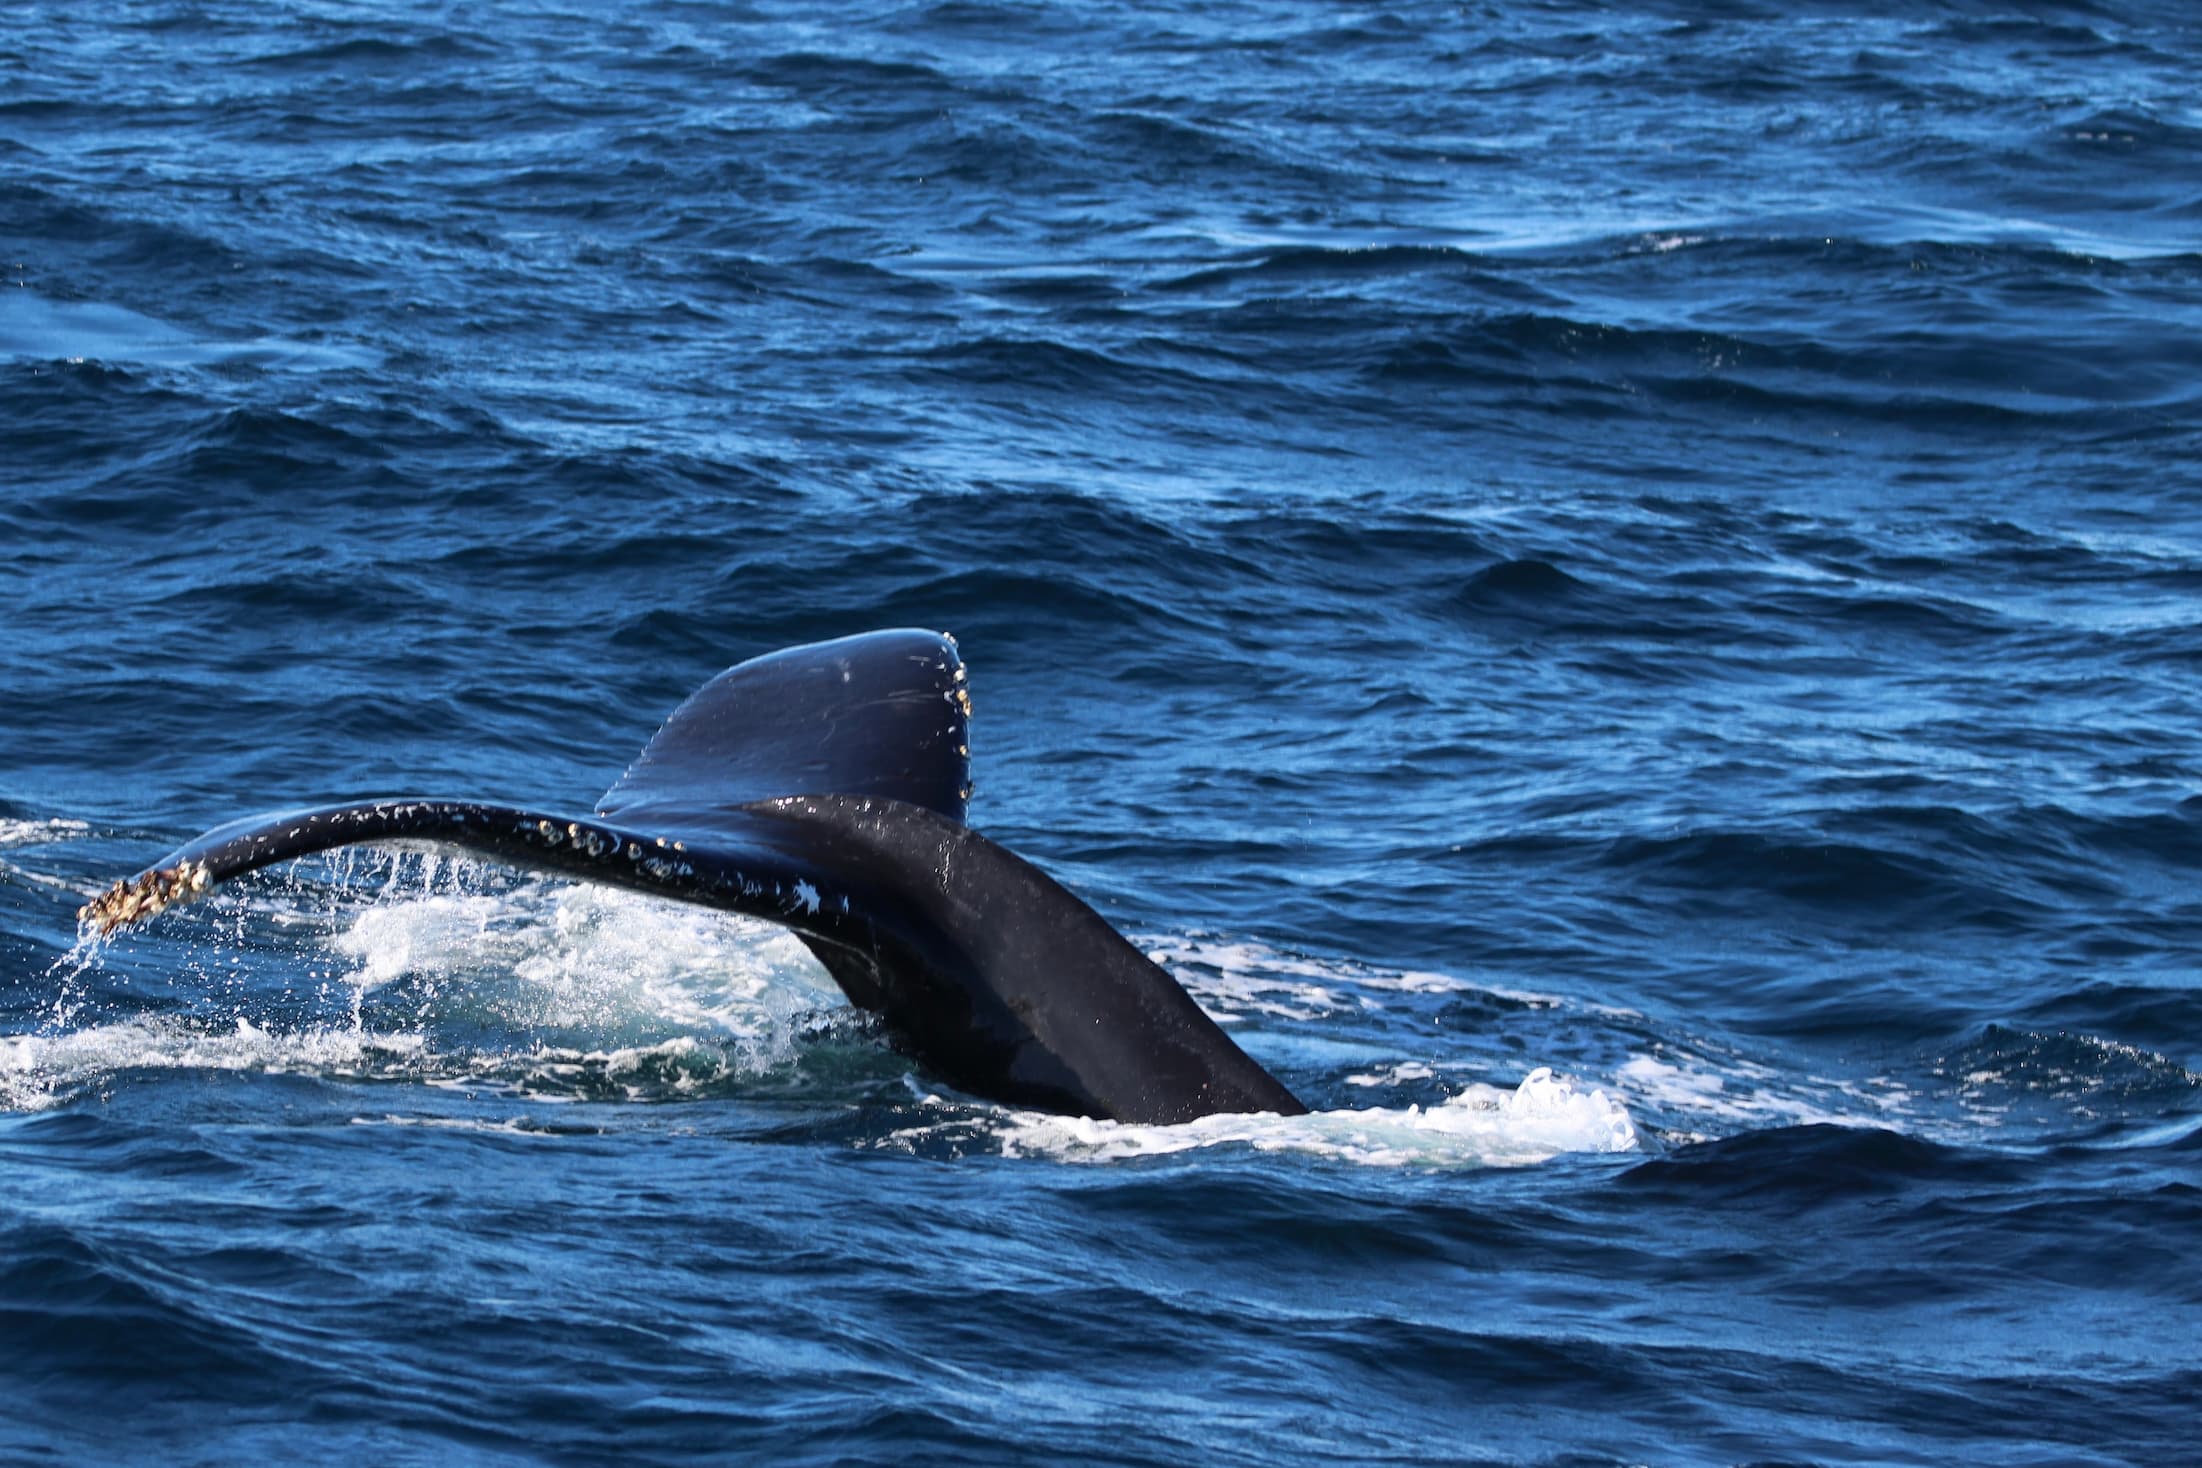 The tail of a humpback whale as it dives down for food